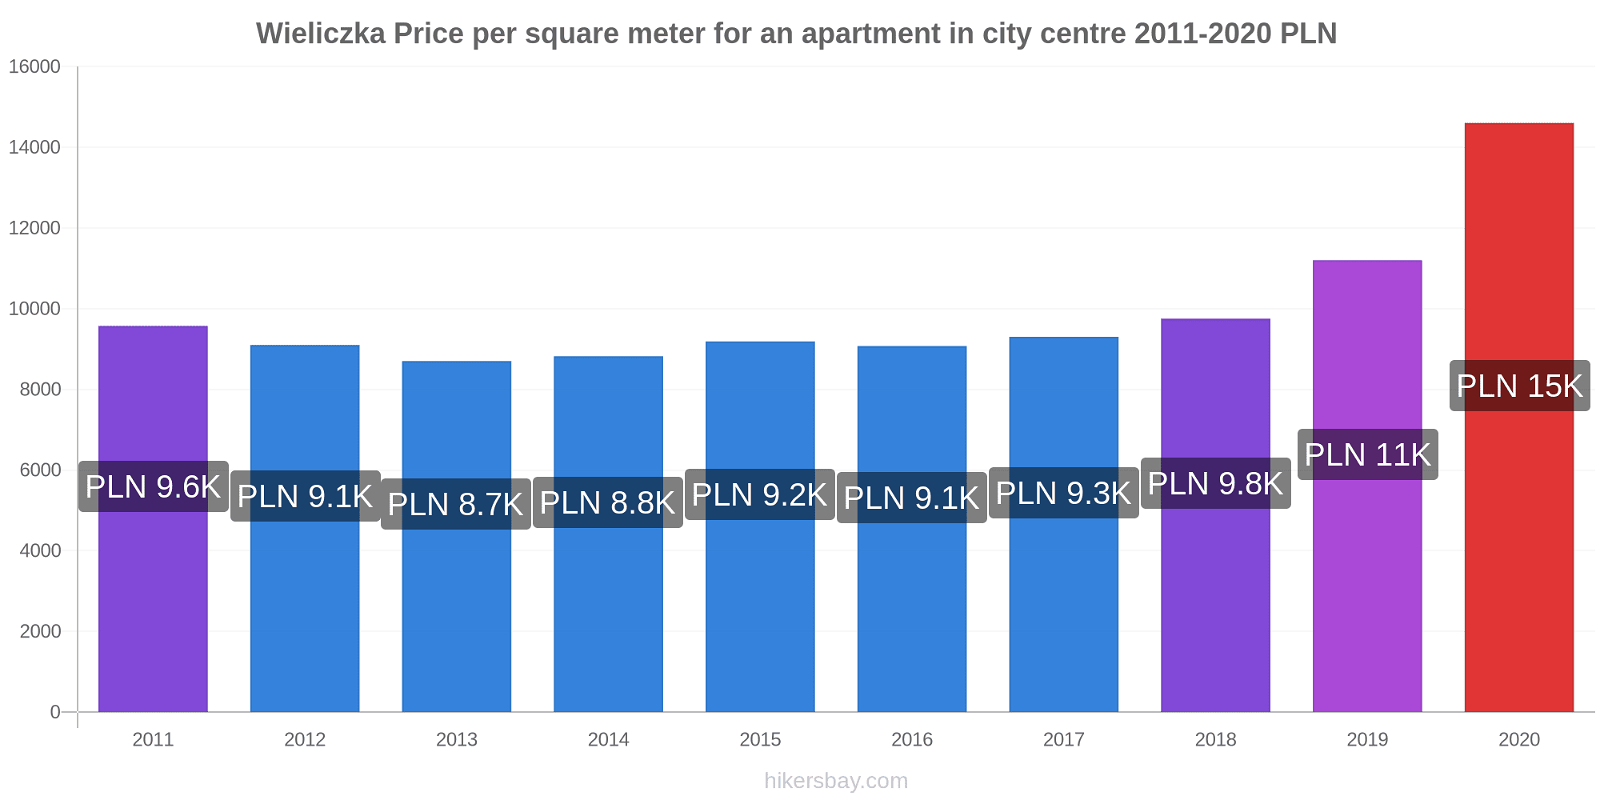 Wieliczka price changes Price per square meter for an apartment in city centre hikersbay.com